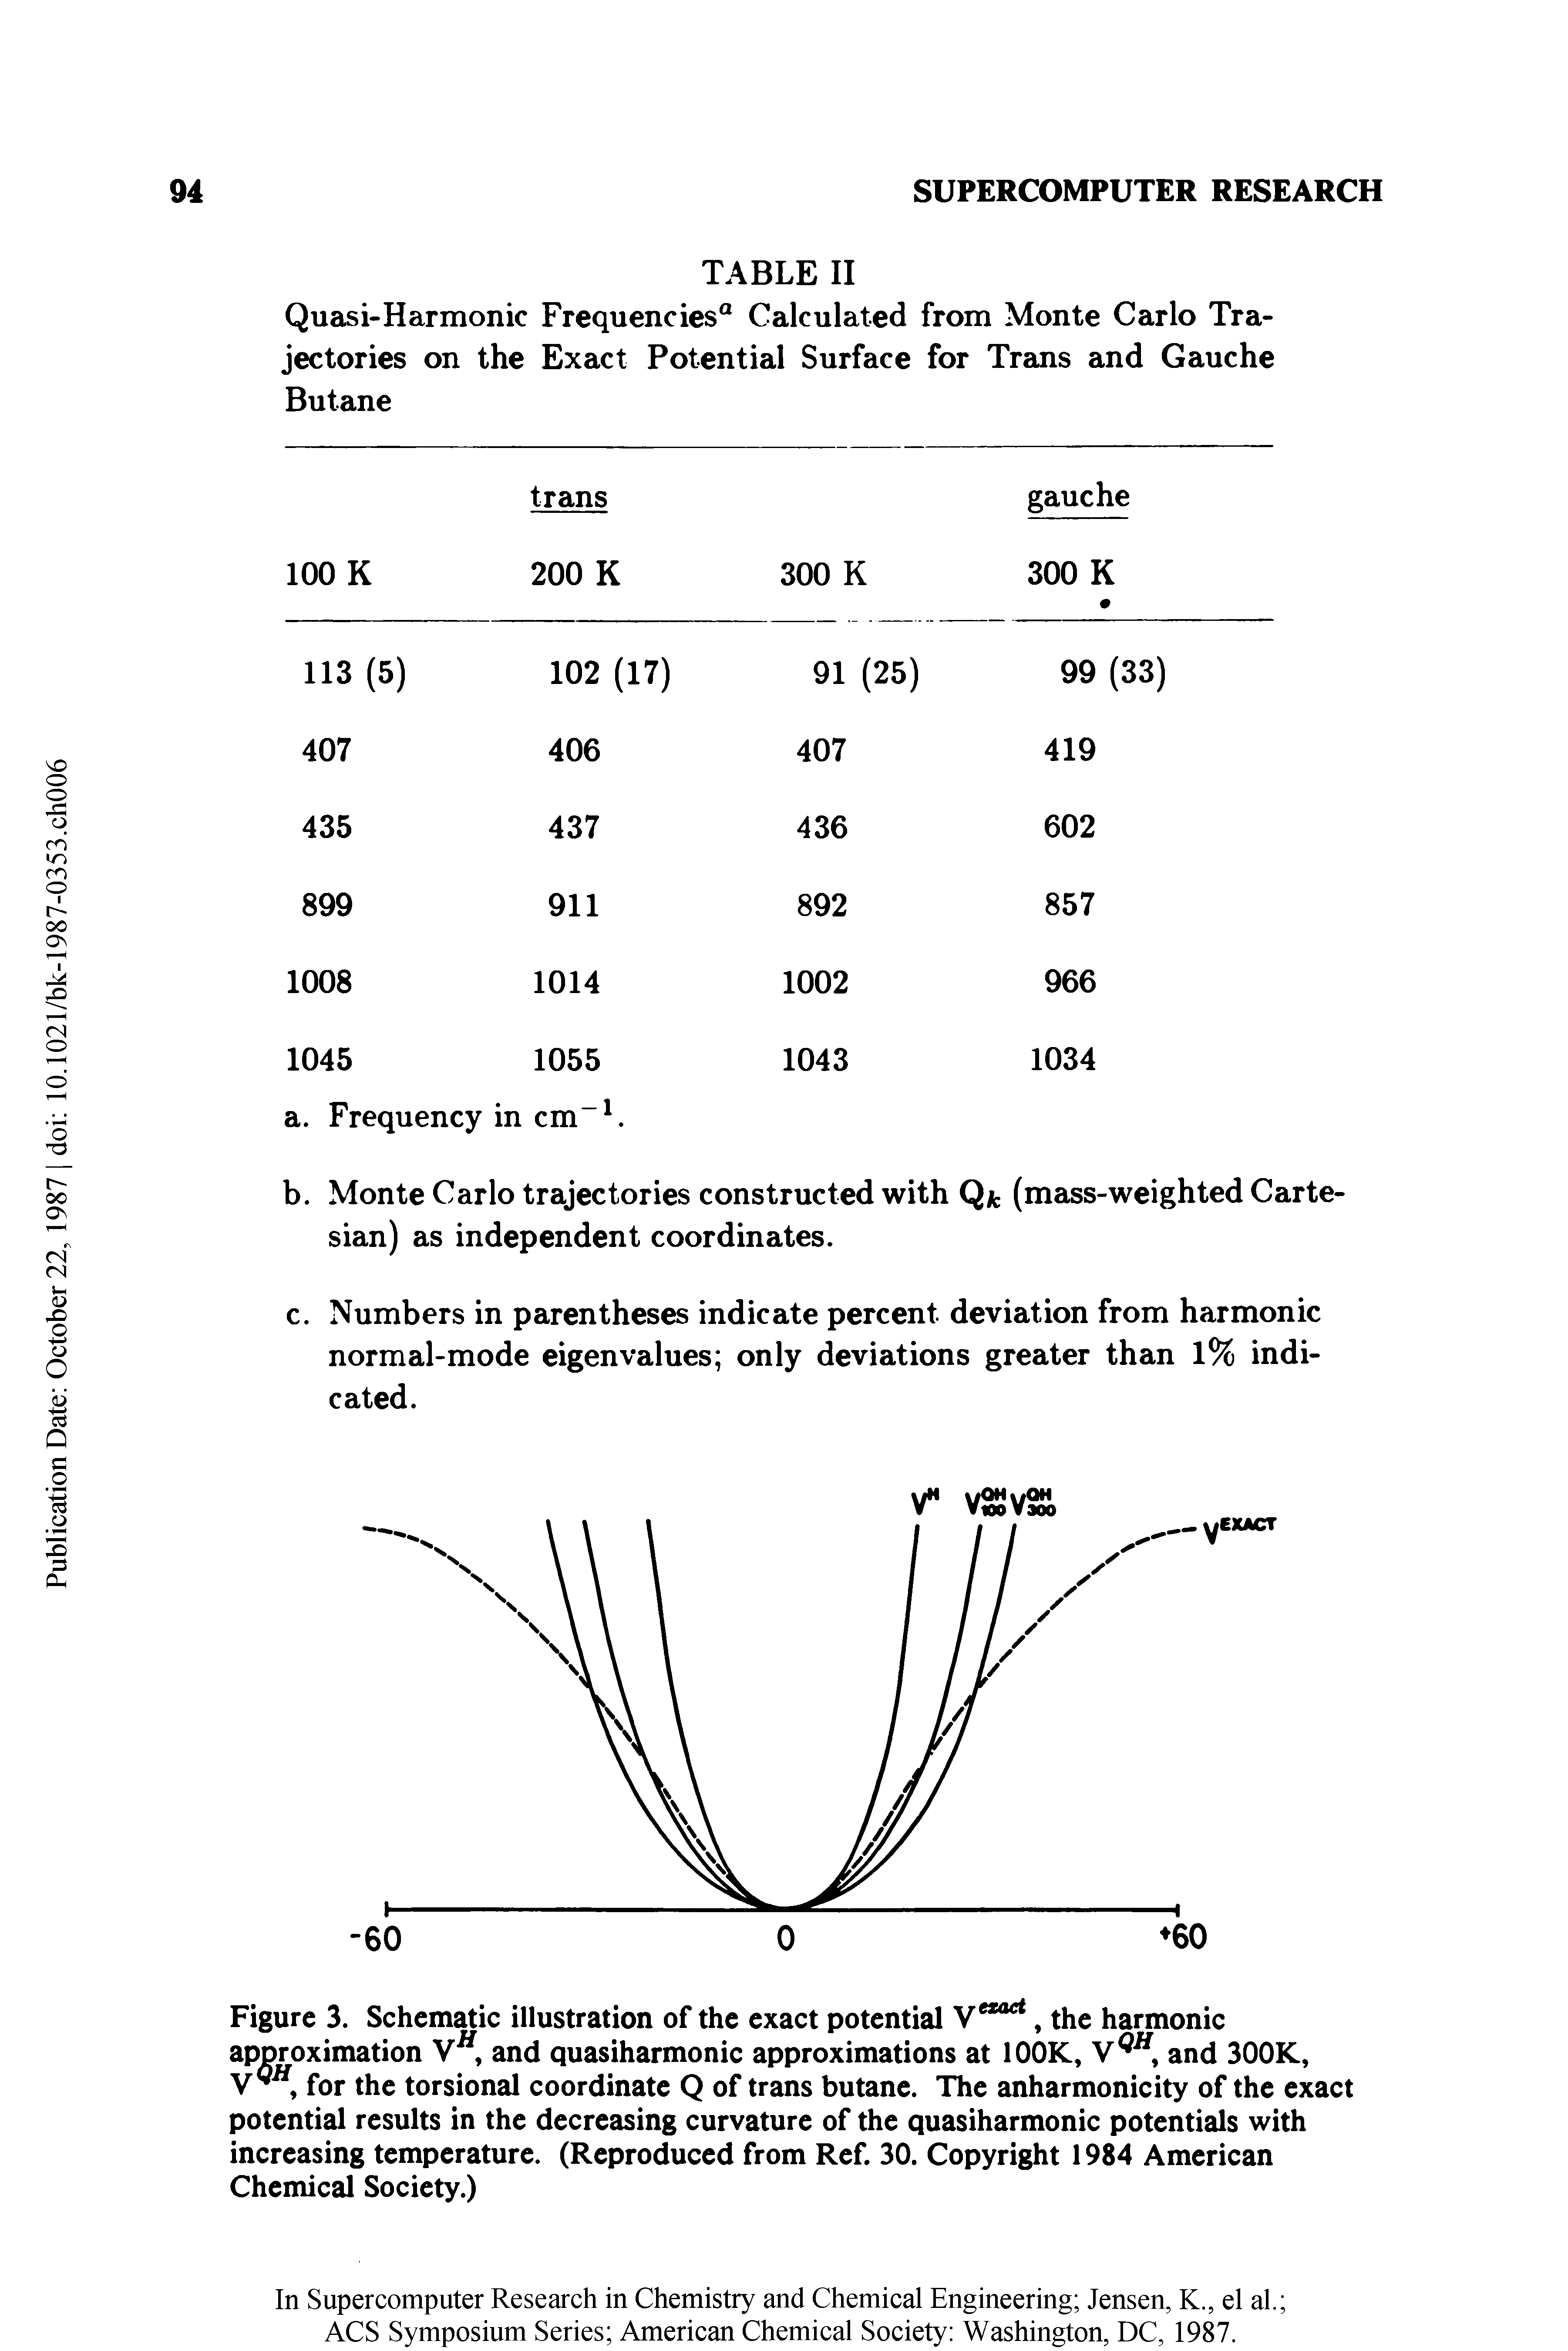 Figure 3. Schematic illustration of the exact potential, the harmonic aporoximation V, and quasiharmonic approximations at lOOK, and 300K, for the torsional coordinate Q of trans butane. The anharmonicity of the exact potential results in the decreasing curvature of the quasiharmonic potentials with increasing temperature. (Reproduced from Ref. 30. Copyright 1984 American Chemical Society.)...